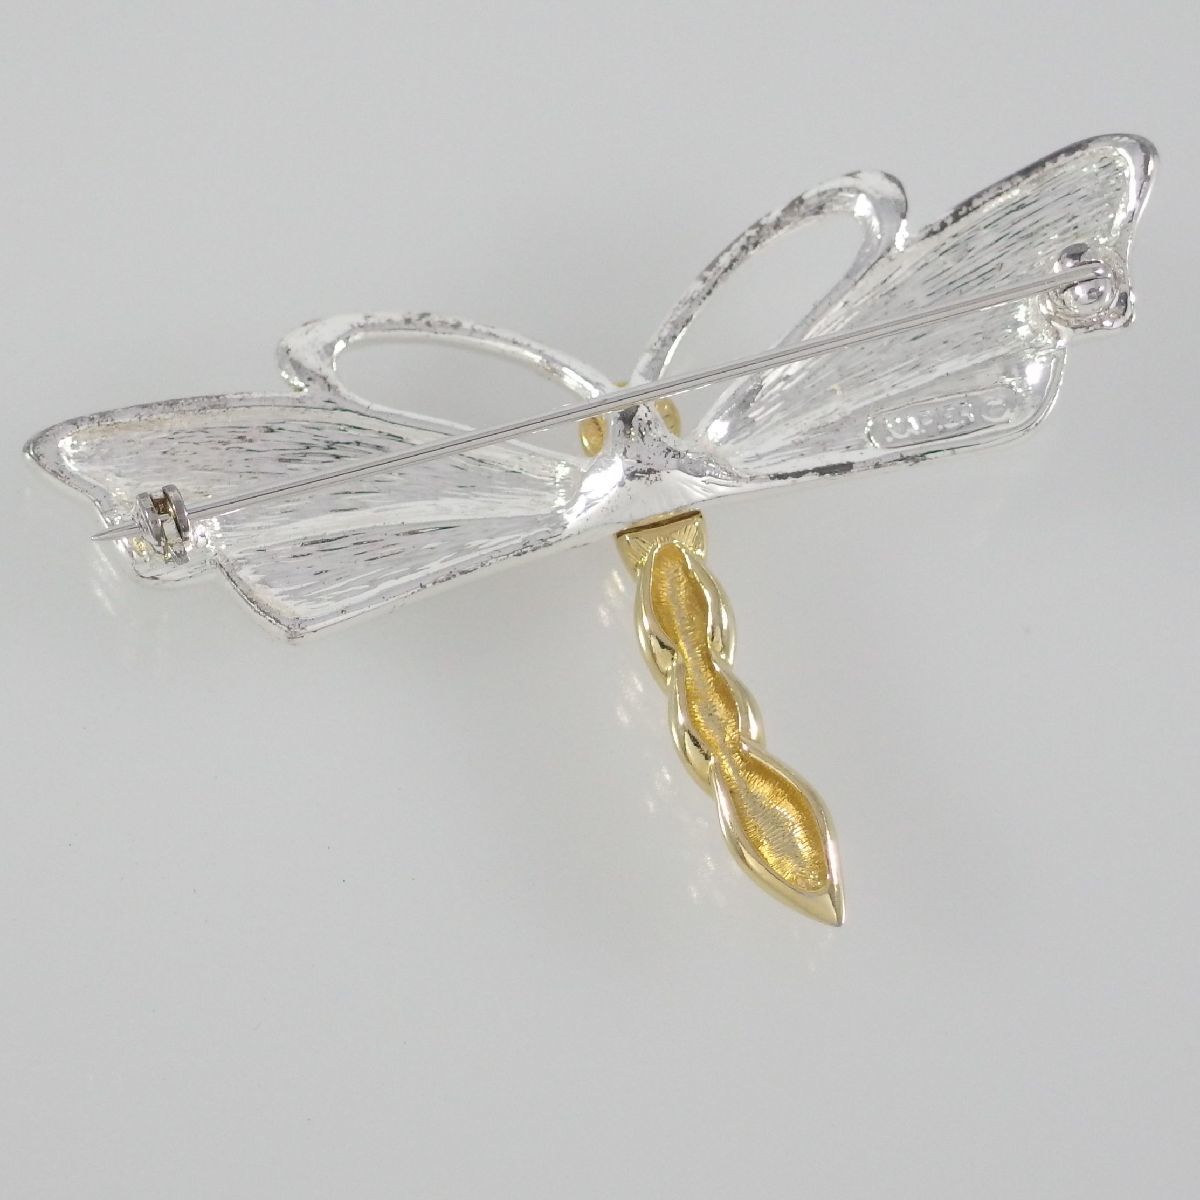 A9012*[NAPIER]* two tone. dragonfly motif *nei Piaa gold color & silver color insect summer nature * Vintage brooch *